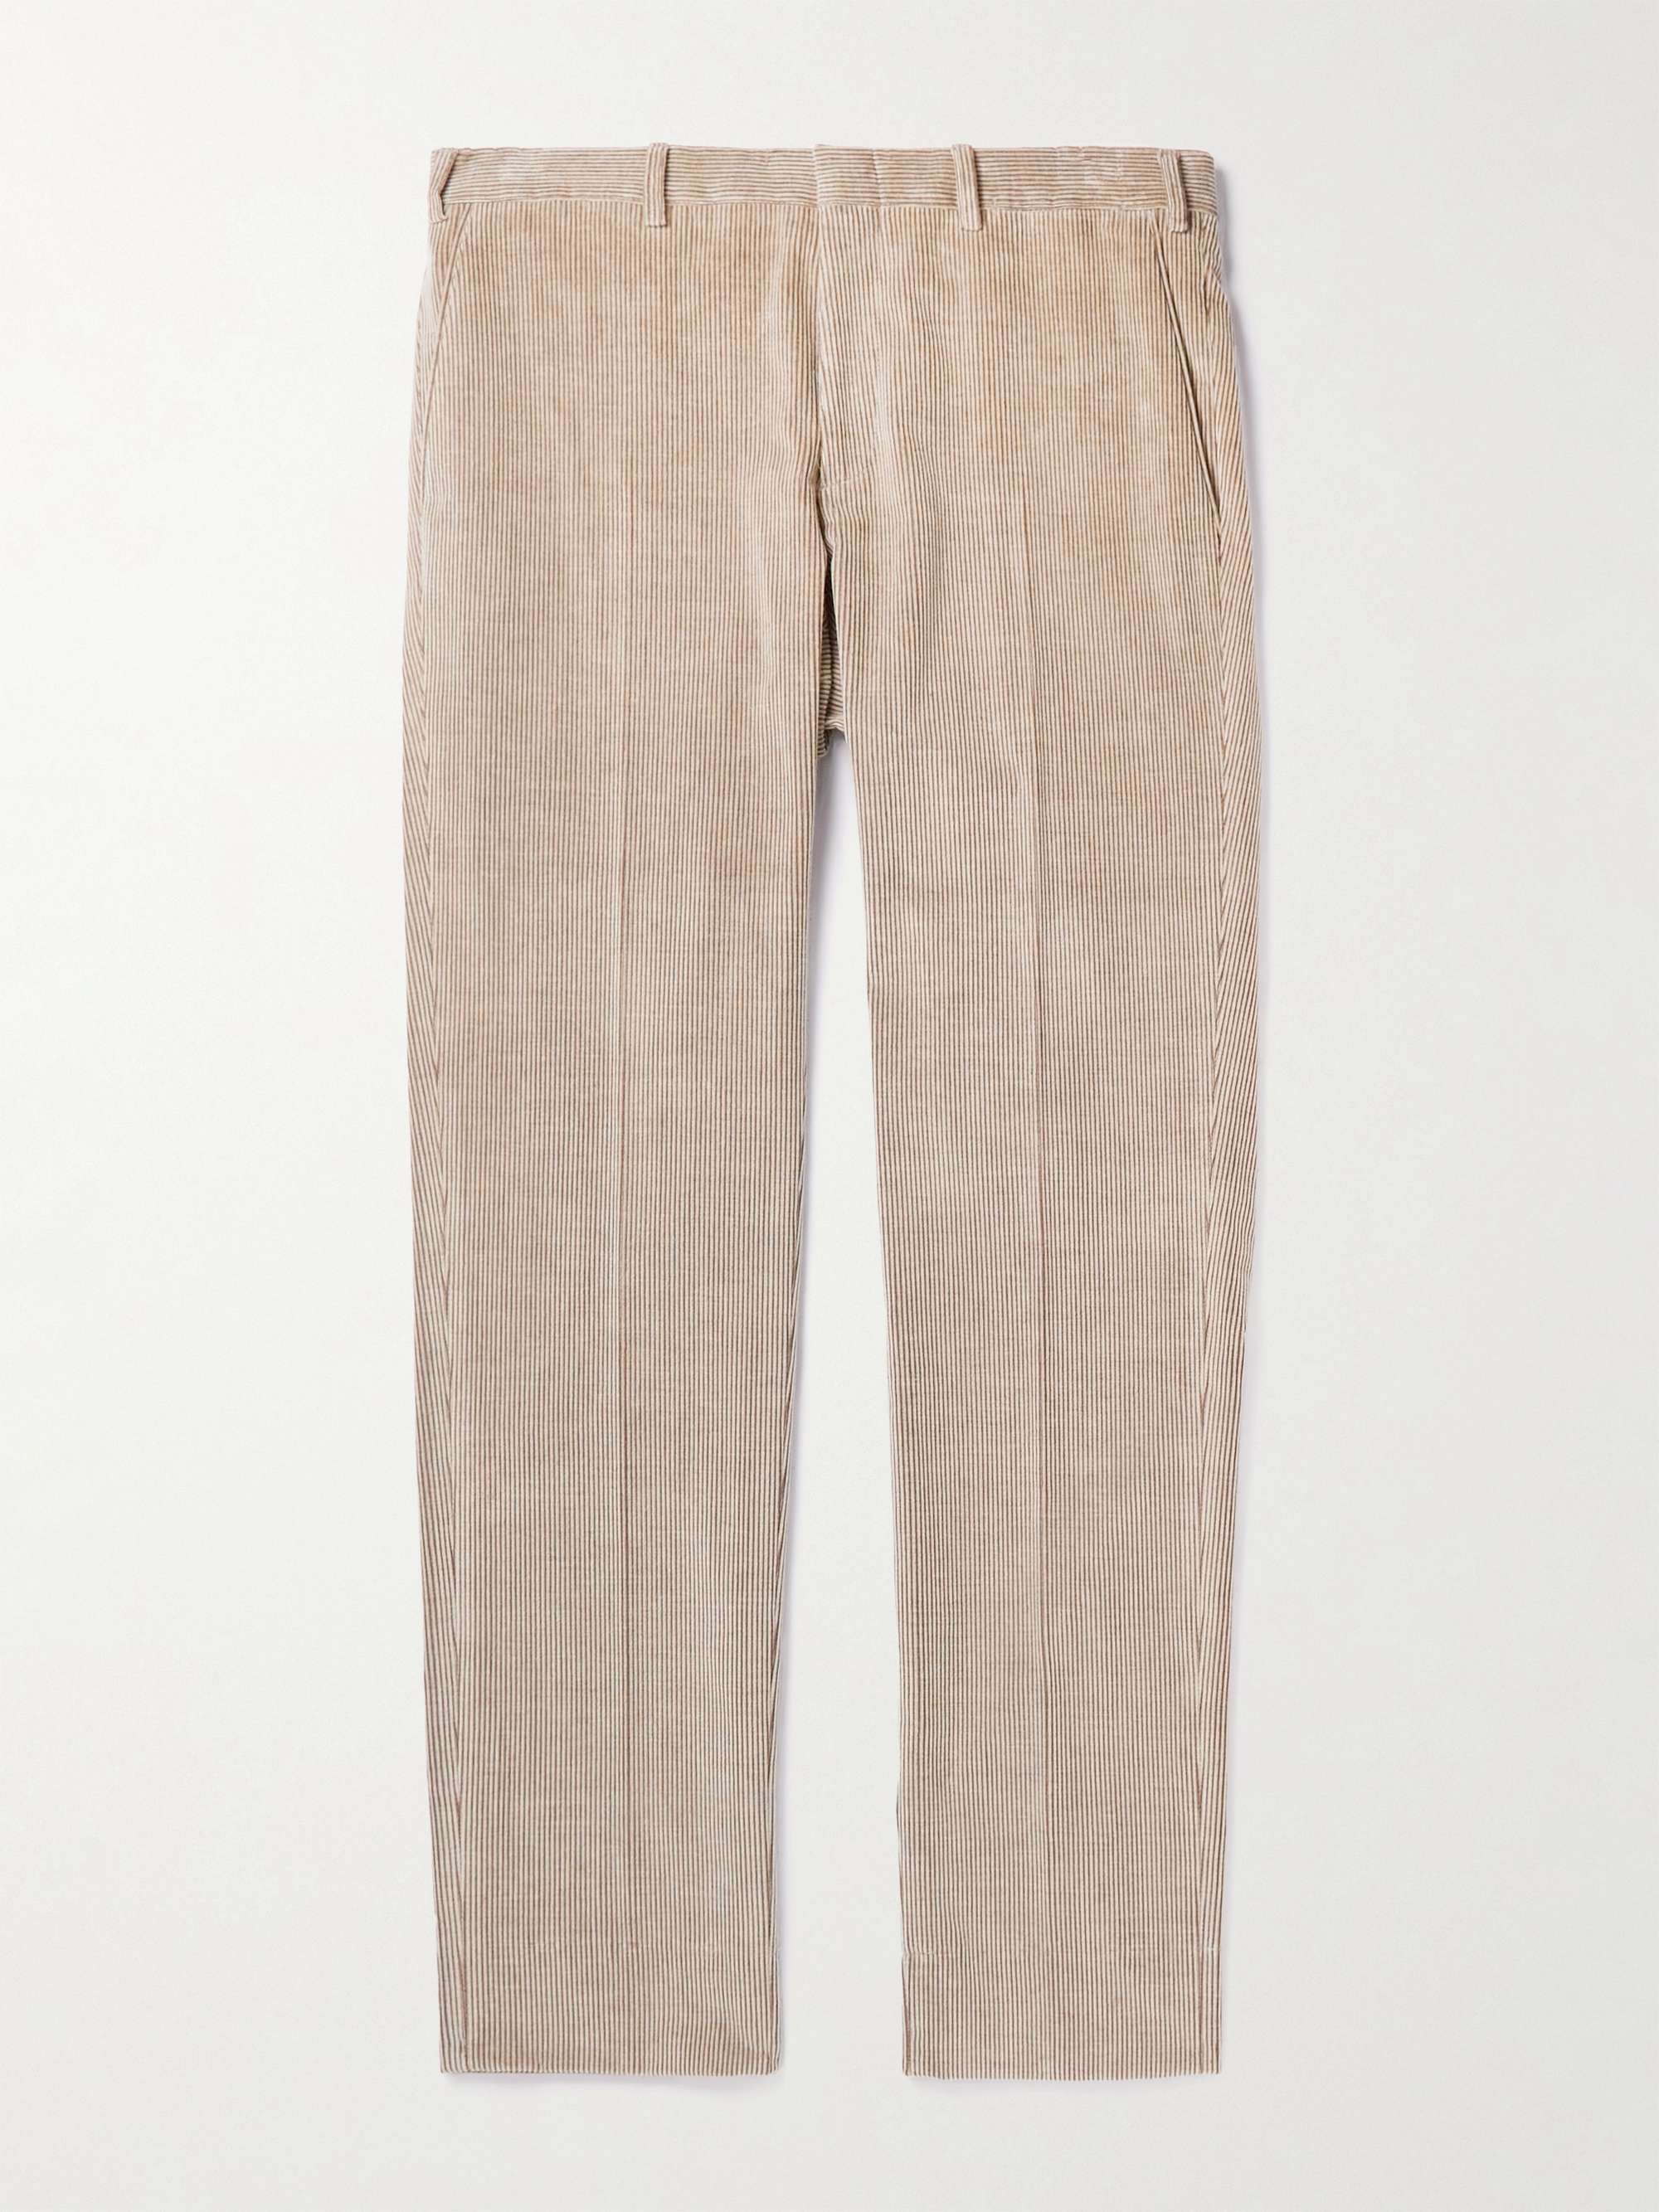 BRIONI Slim-Fit Tapered Pleated Cotton and Cashmere-Blend Corduroy Suit Trousers